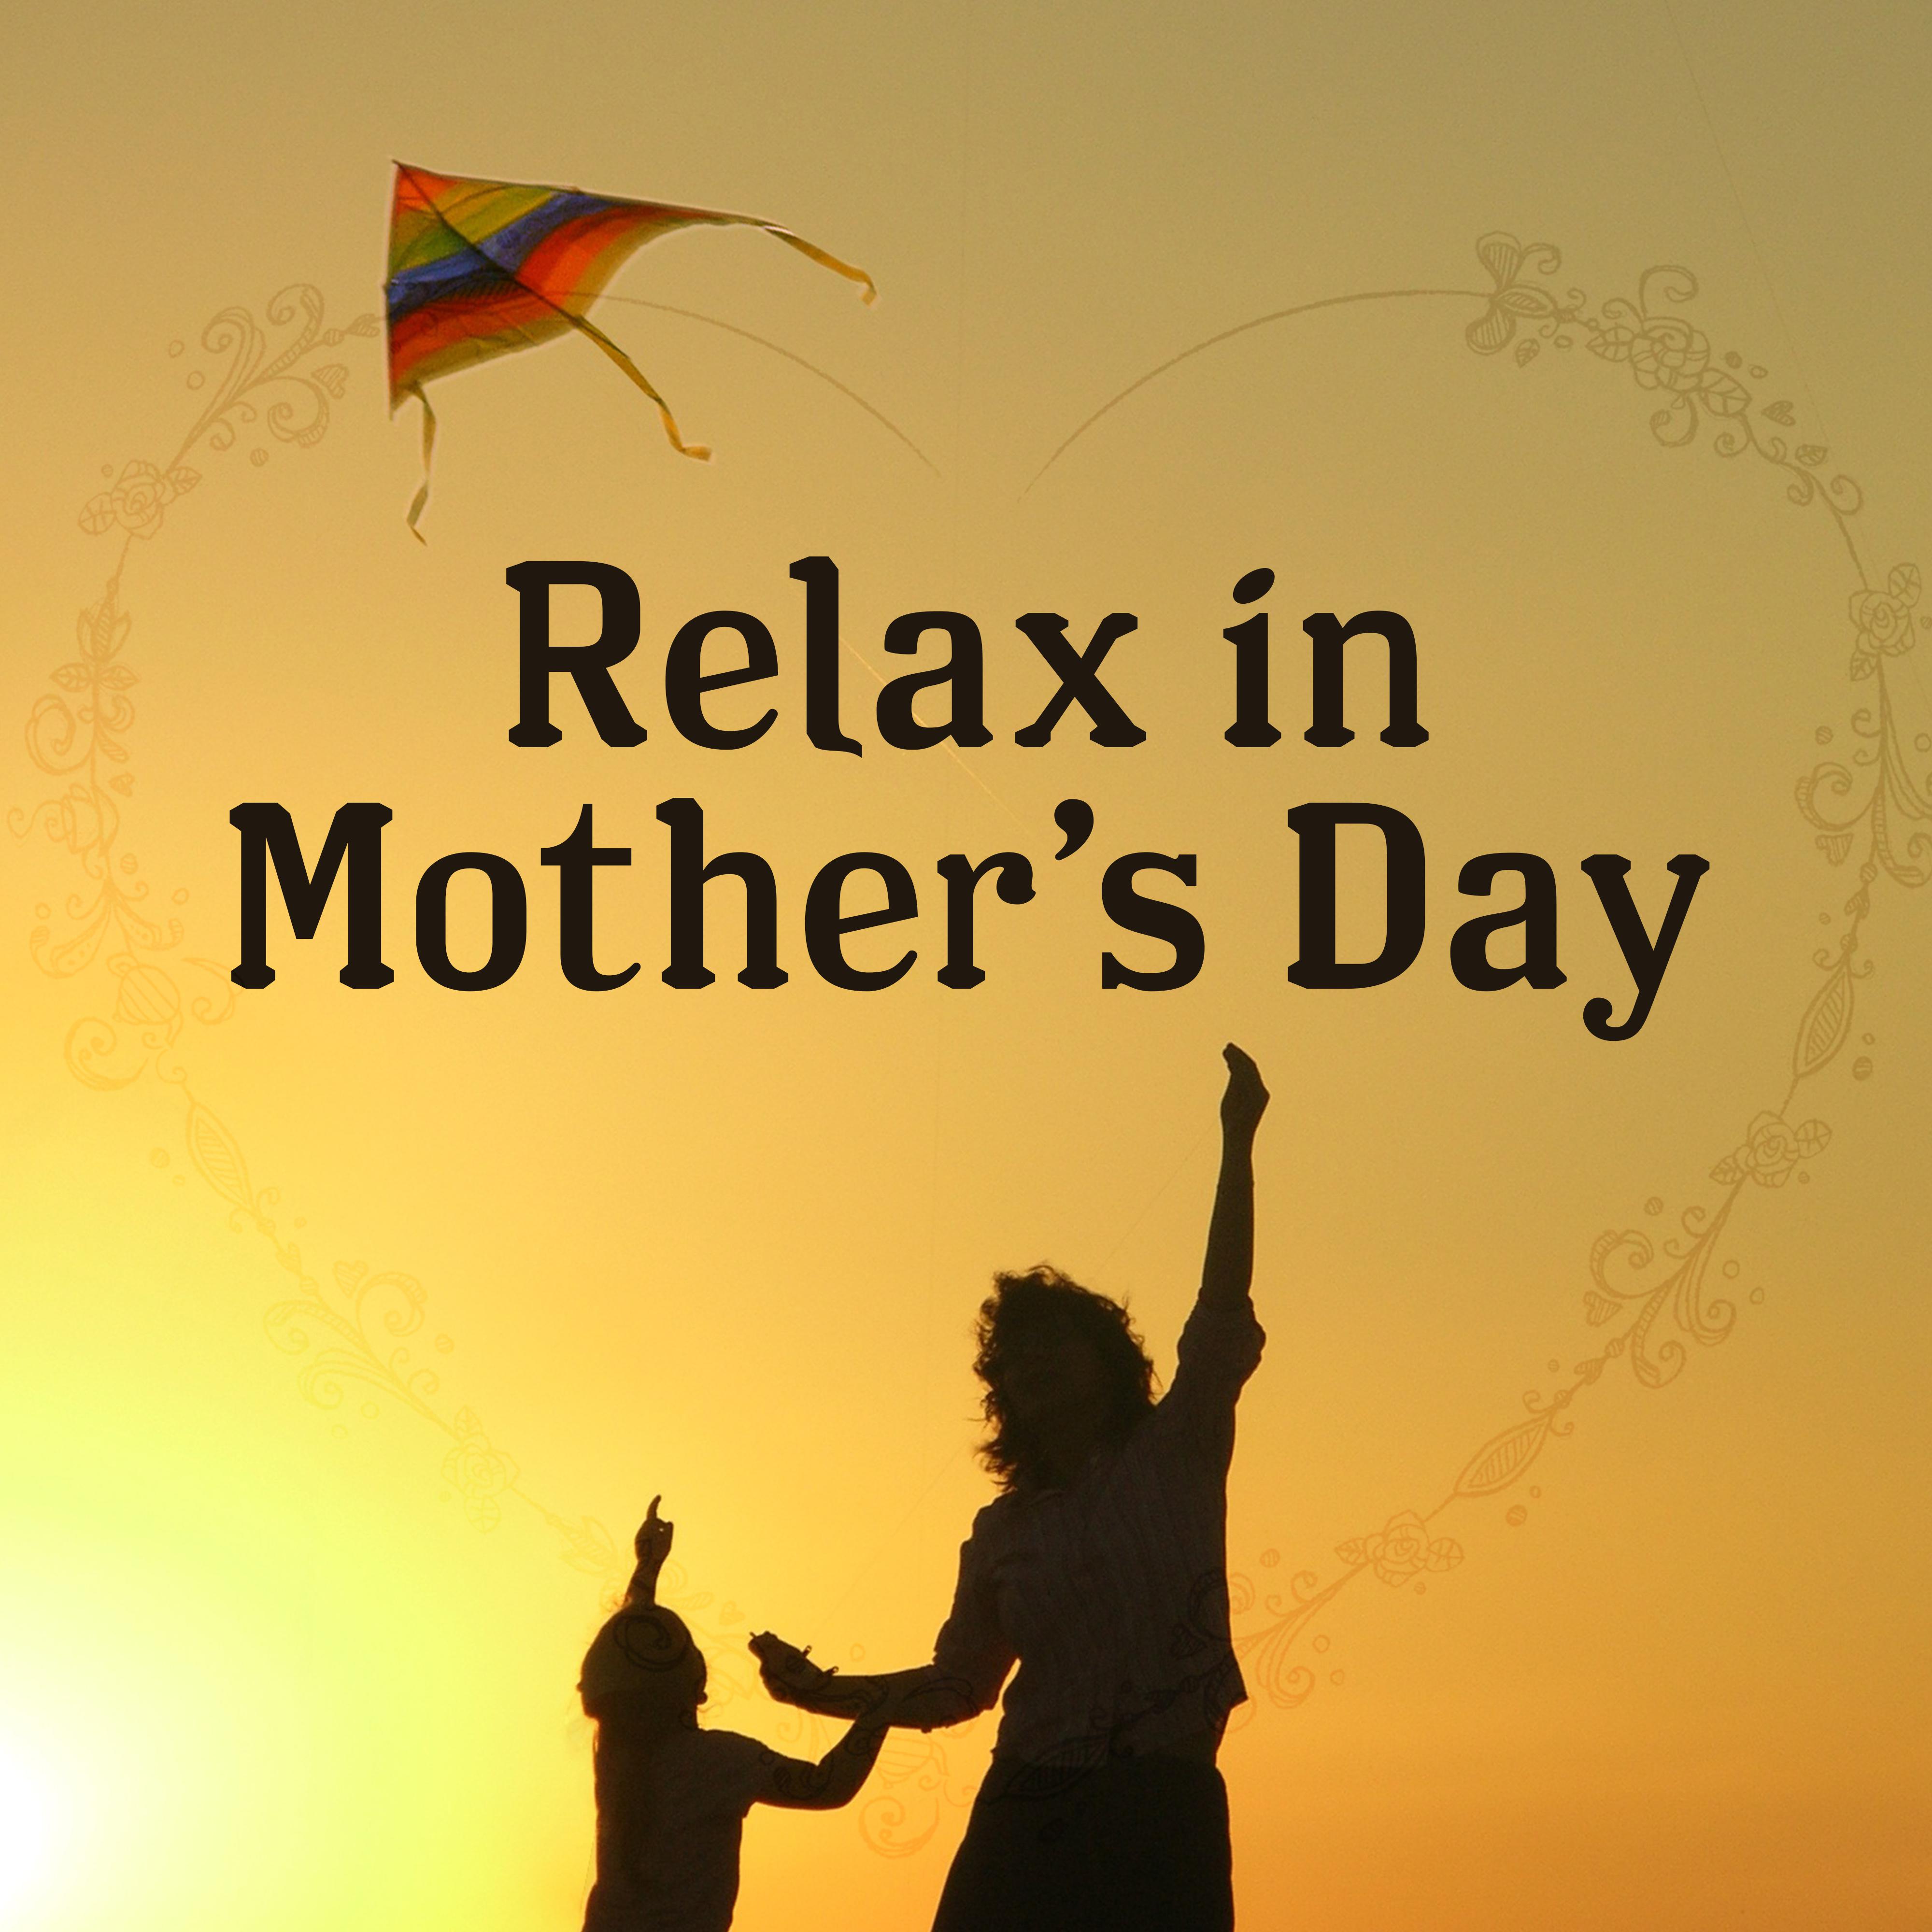 Relax in Mother' s Day  Classical Music for Mothers to Relax, Ambient Instrumental Piano, Mother' s Day